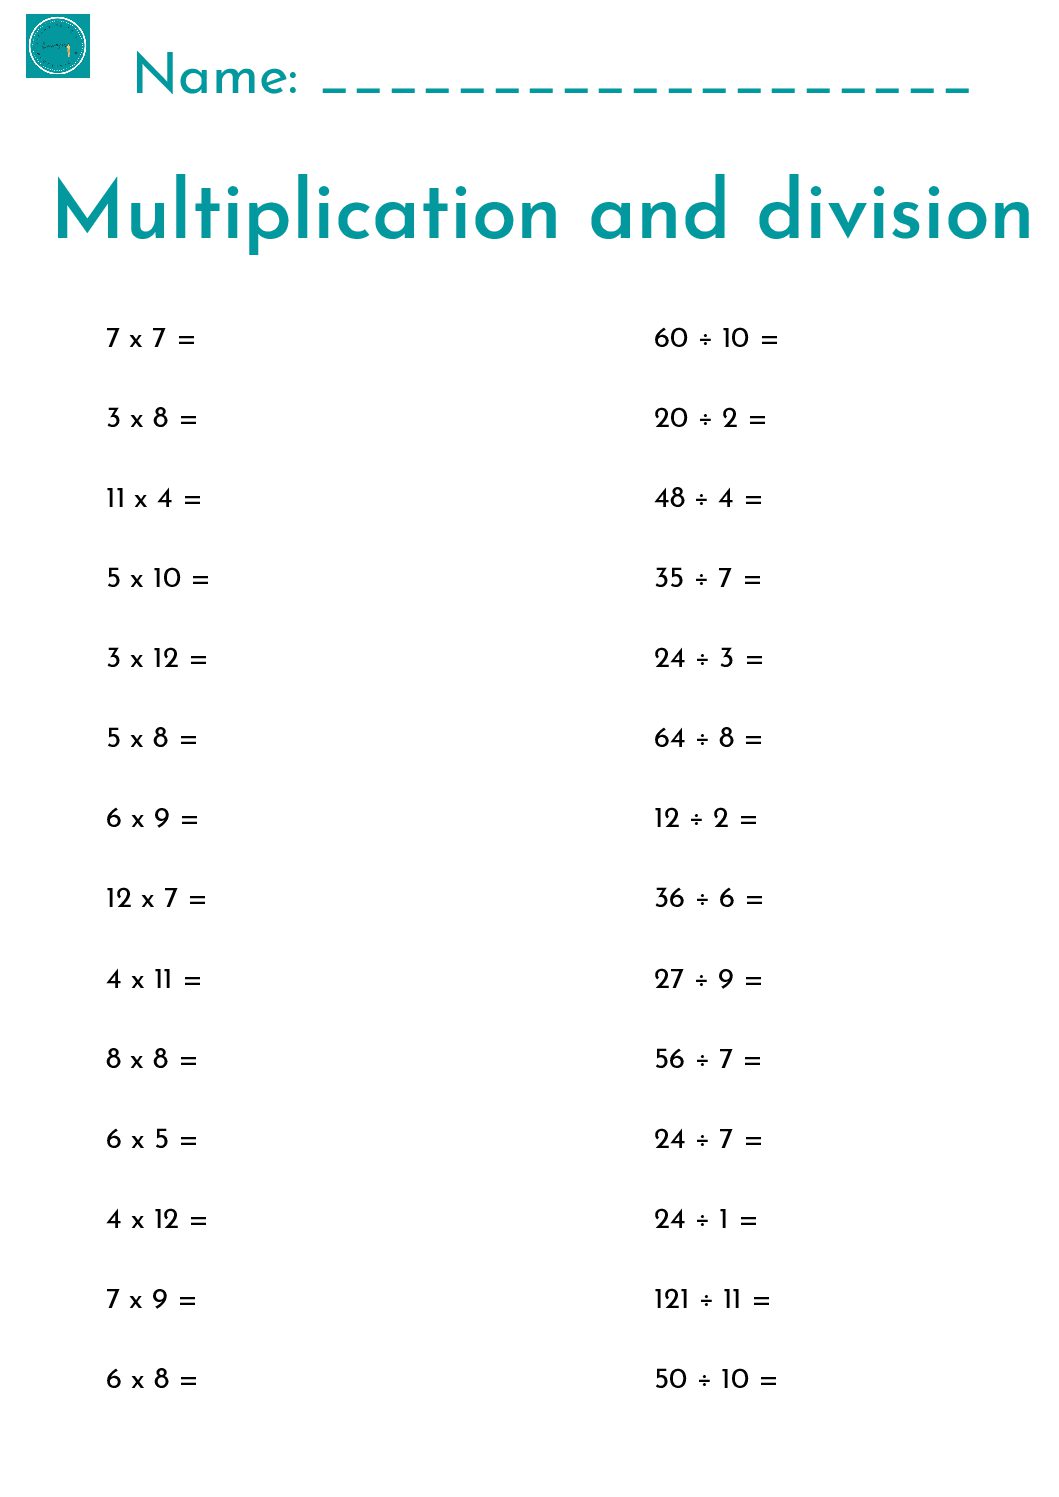 marin-hanche-syndrome-multiplication-and-division-worksheets-impliqu